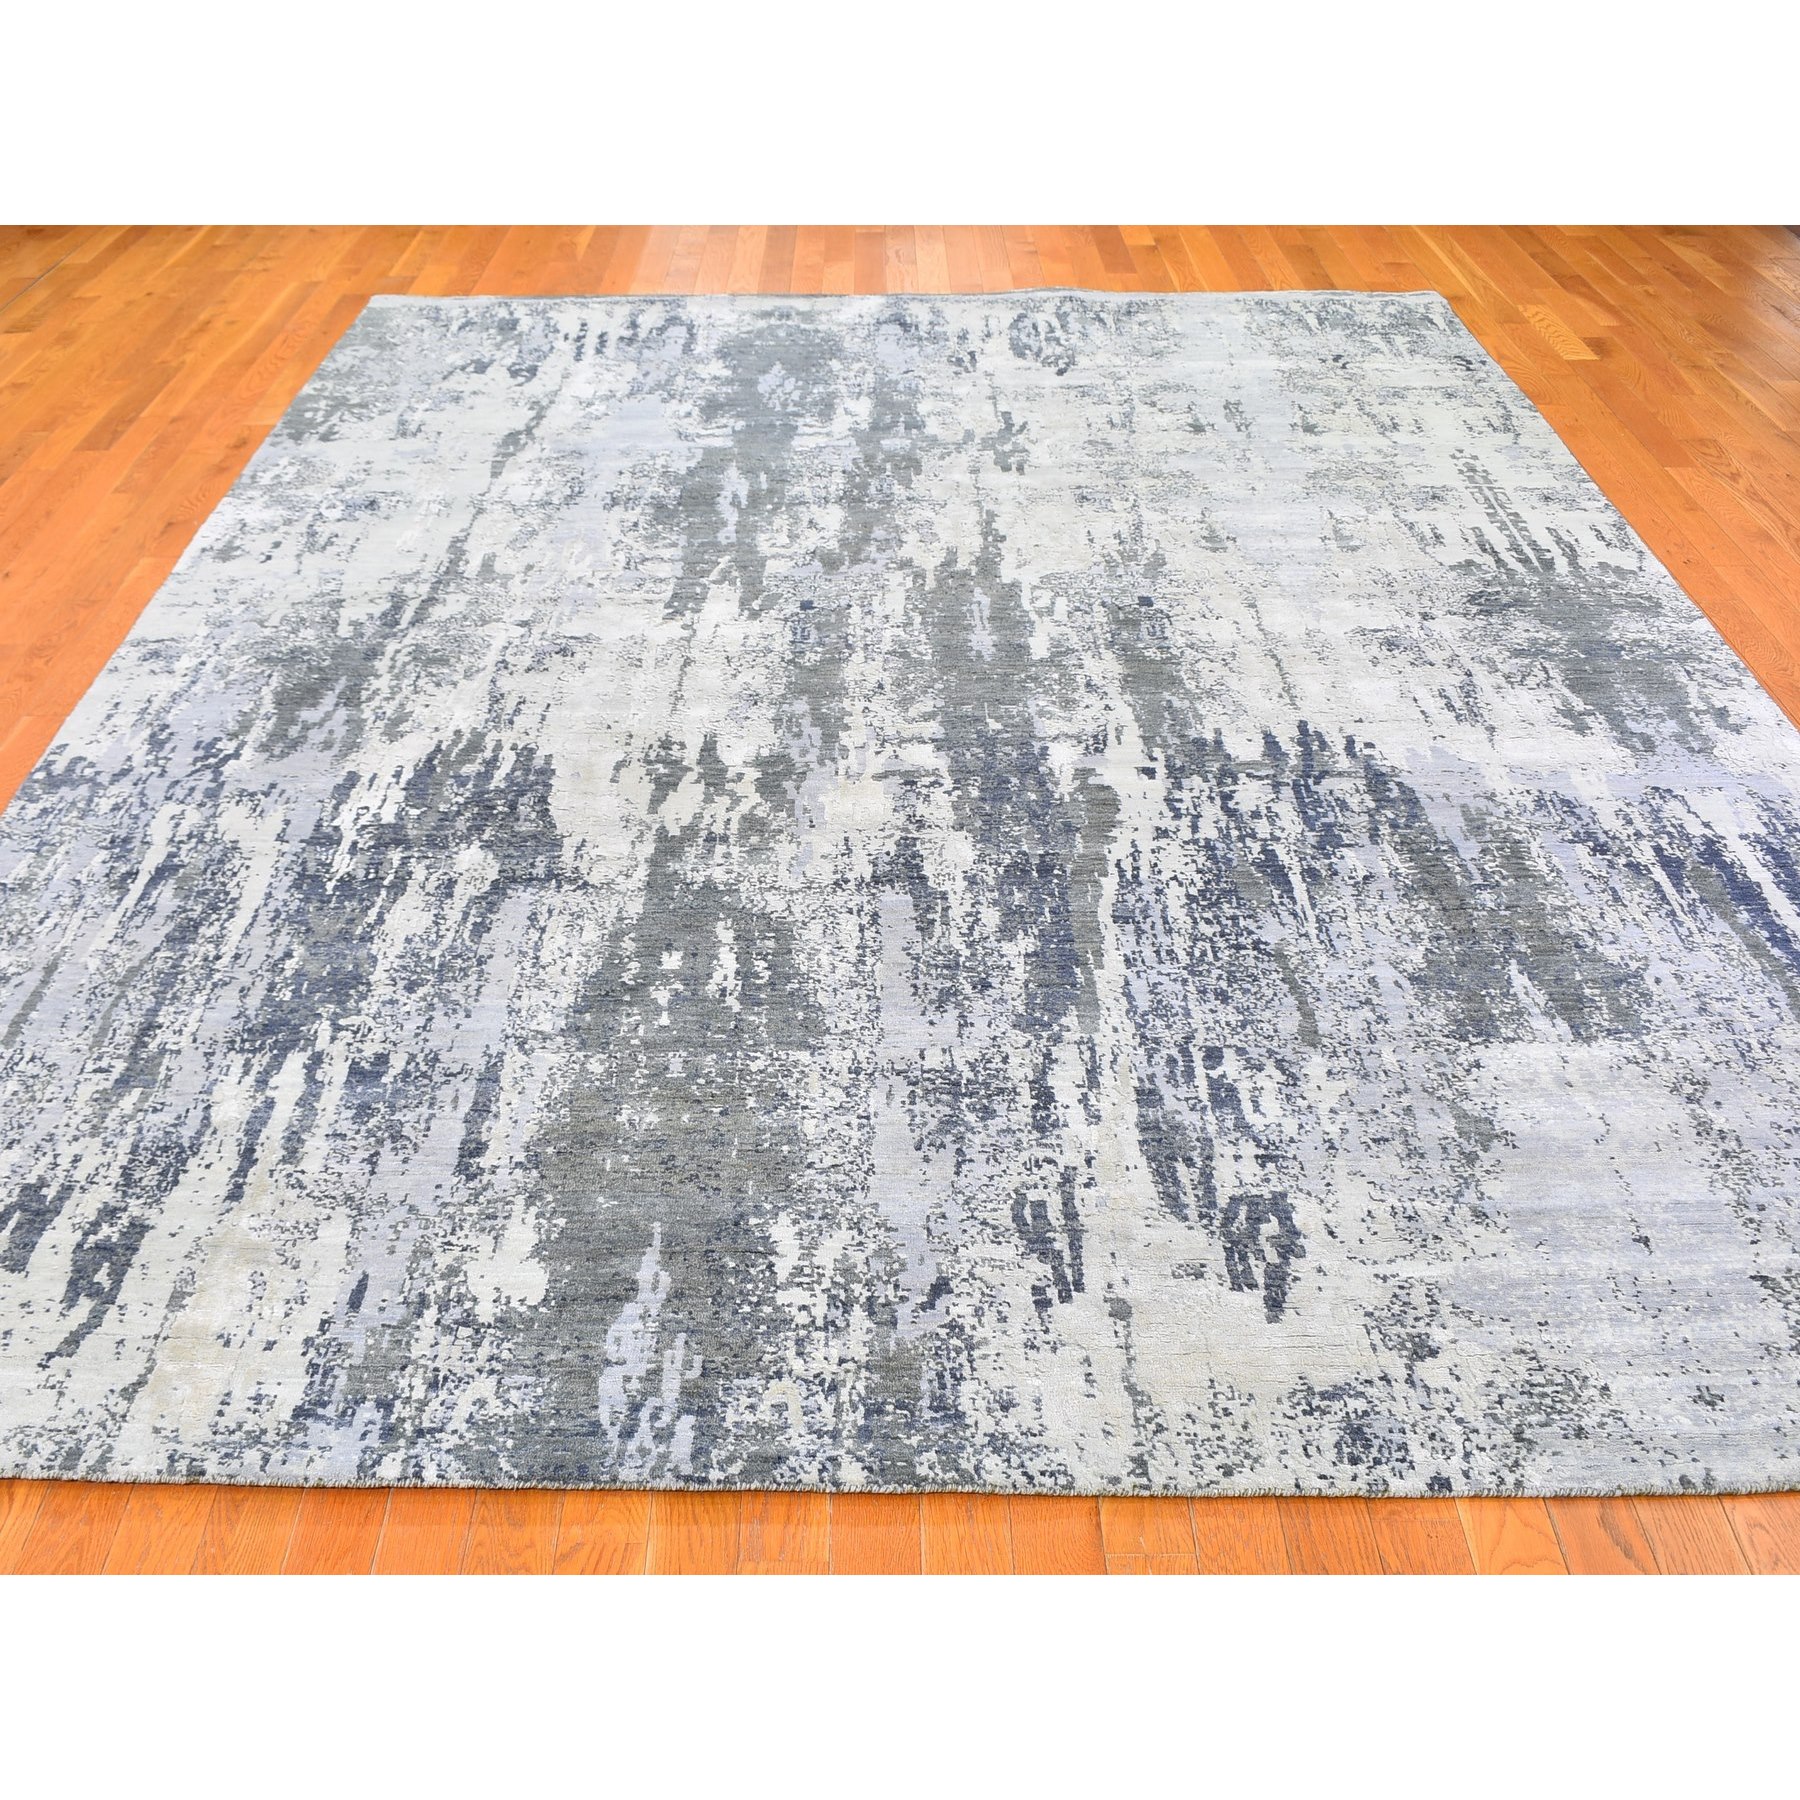 9'x12' Ivory Wool with Real Silk Abstract Design Denser Weave Hi-Low Pile Hand Woven Oriental Rug 